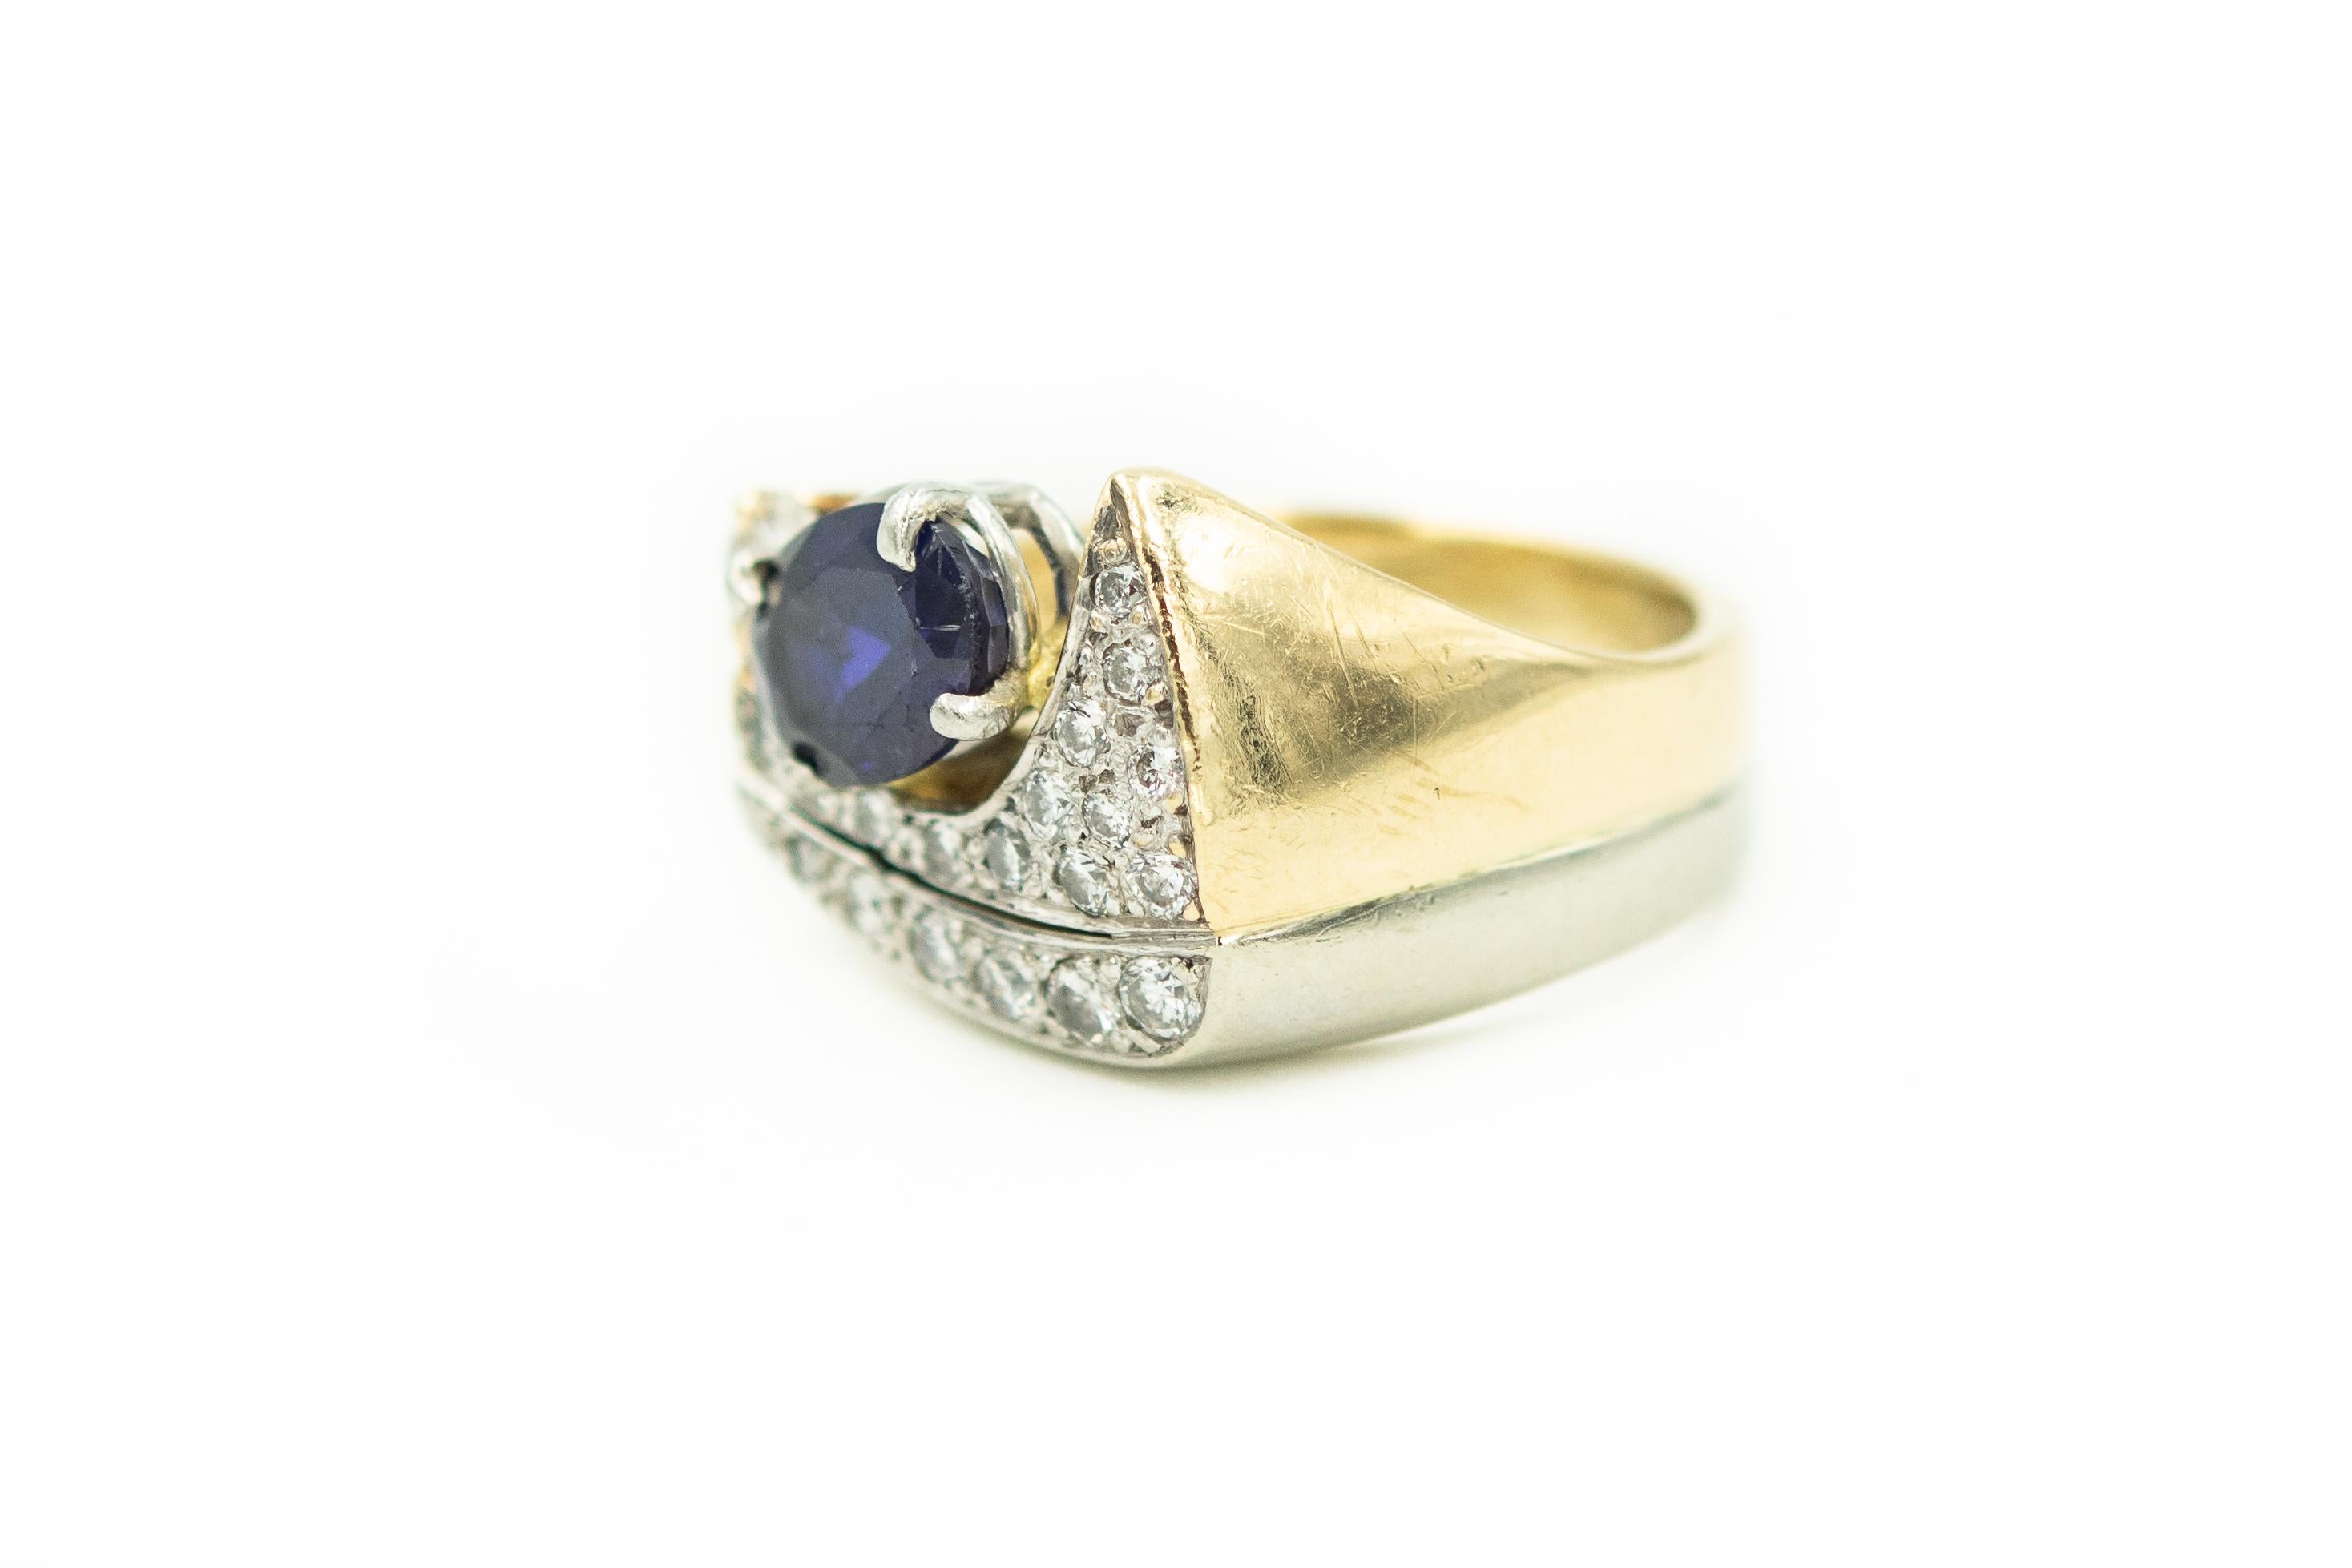 Very cool modernist stylized ring featuring a prong set oval tanzanite  (approximately 1.65 carats) which is accented by a single .15 carat (approximate weight) carat round full cut diamond and an additional 19 bead set diamonds.  The approximate